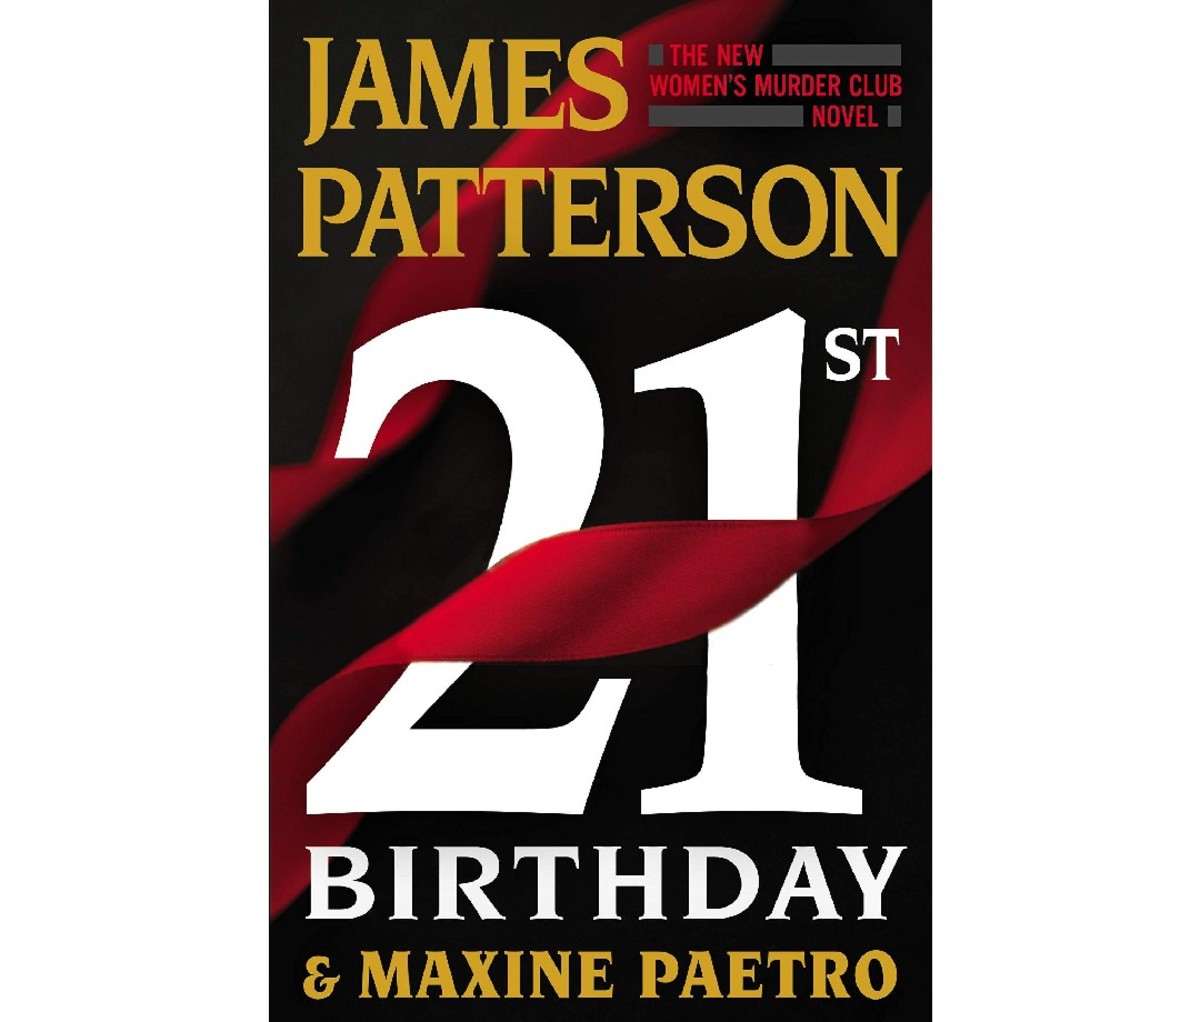 21st Birthday by James Patterson and Maxine Paetro